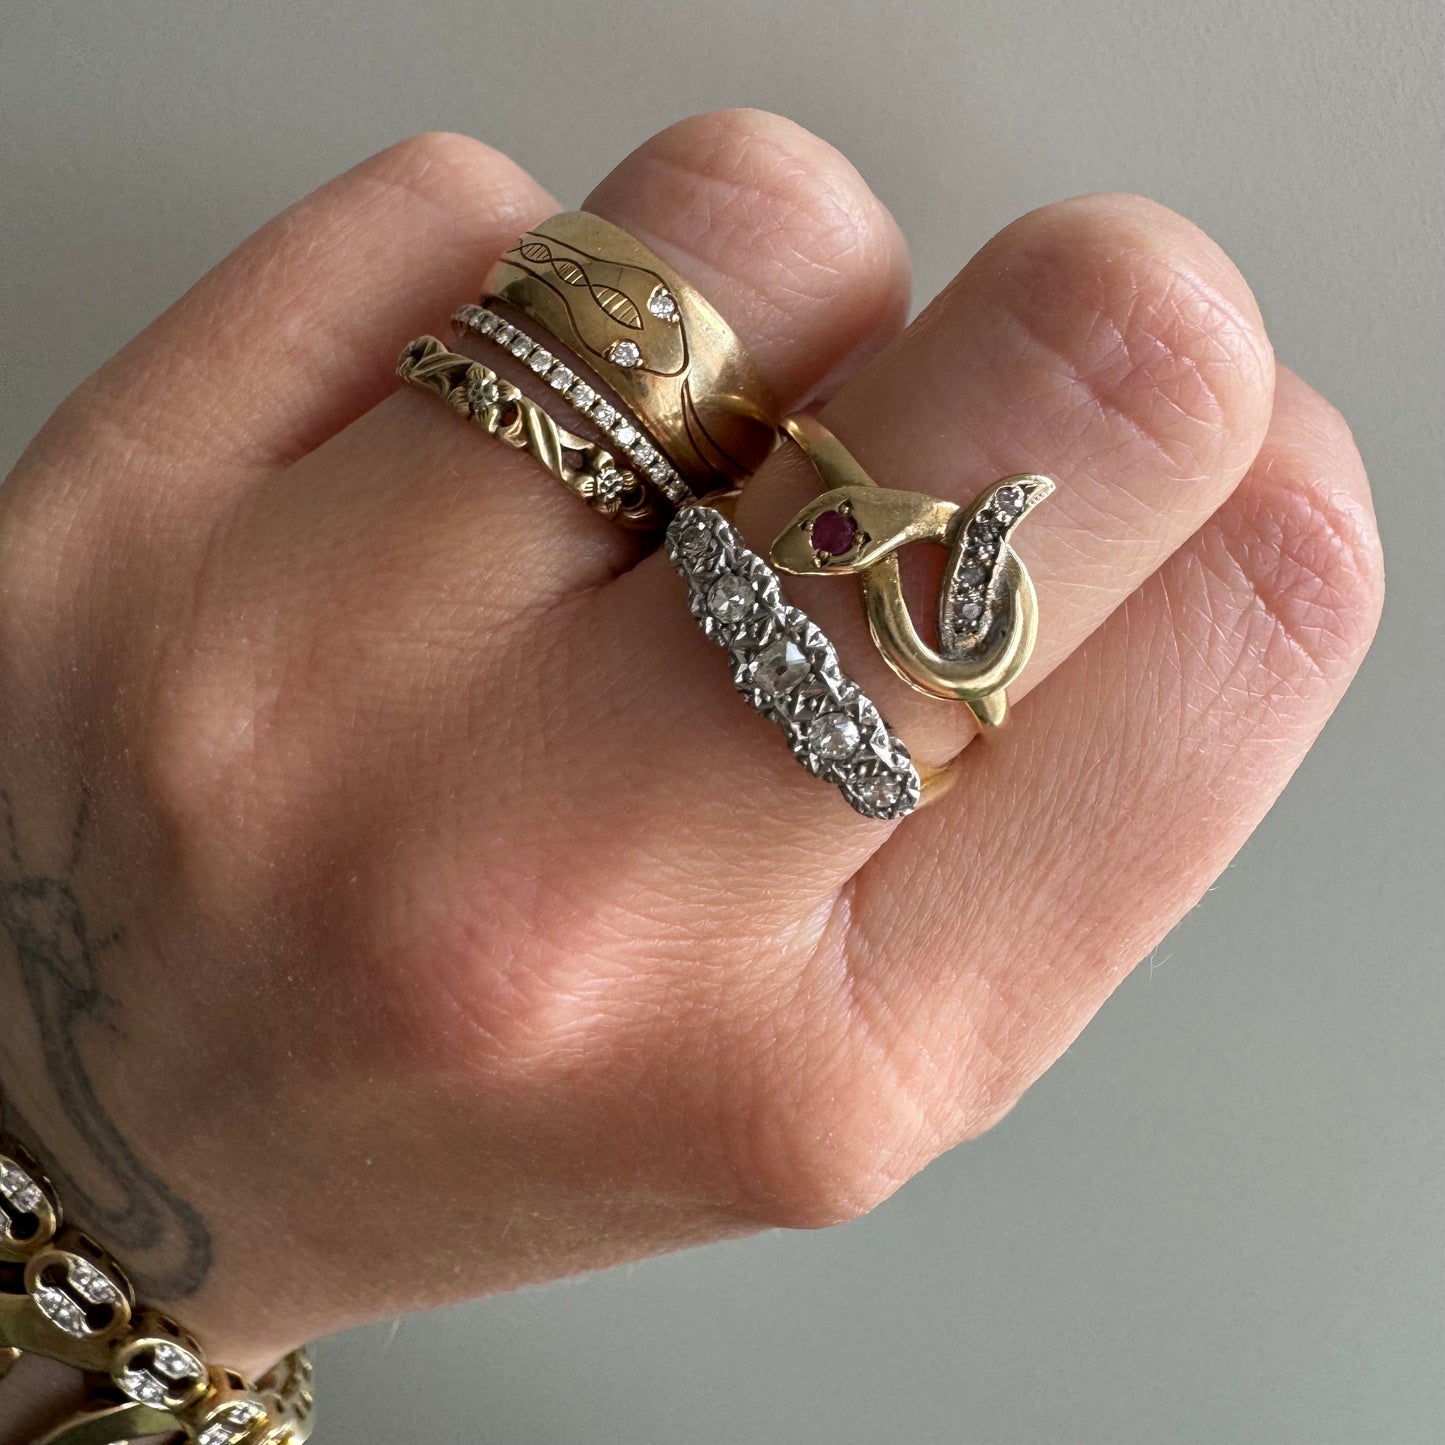 V I N T A G E // self embrace / 9k yellow gold love knot snake ring with diamonds and ruby / size 7.25 to 7.5